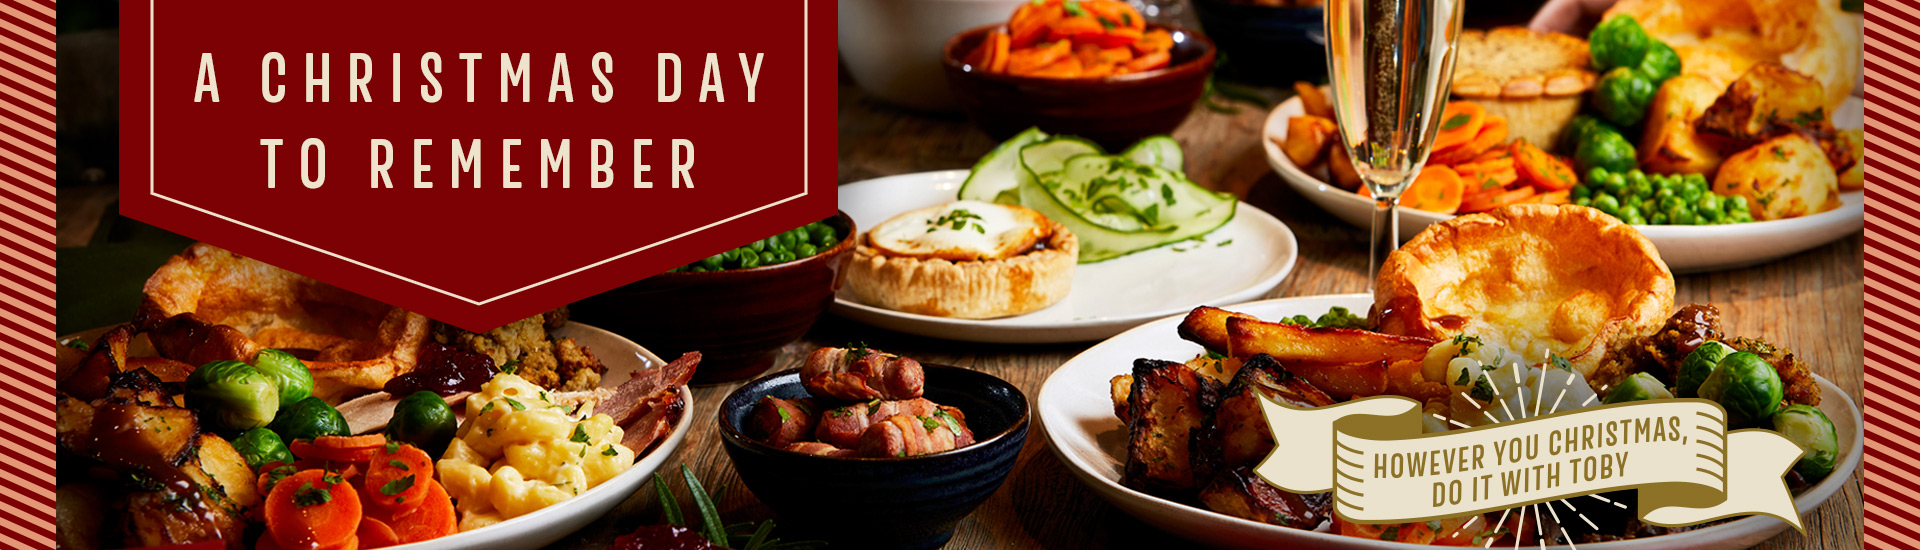 Christmas Day menu at Toby Carvery Keighley